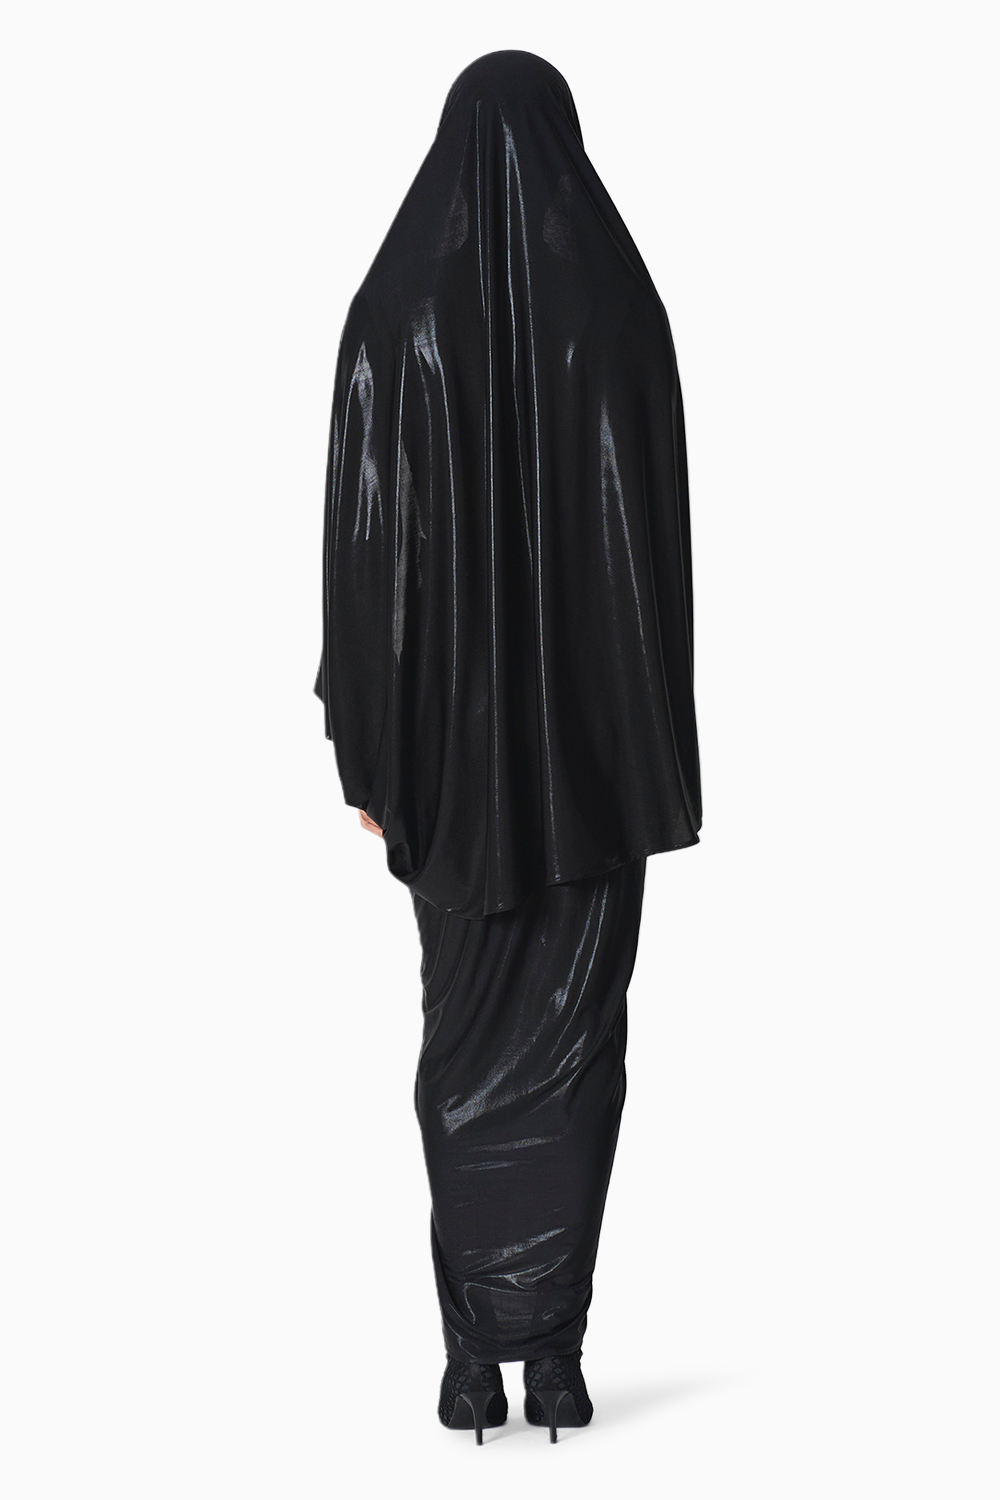 Fio Top and Liquid Nora Skirt with Kanye Cape